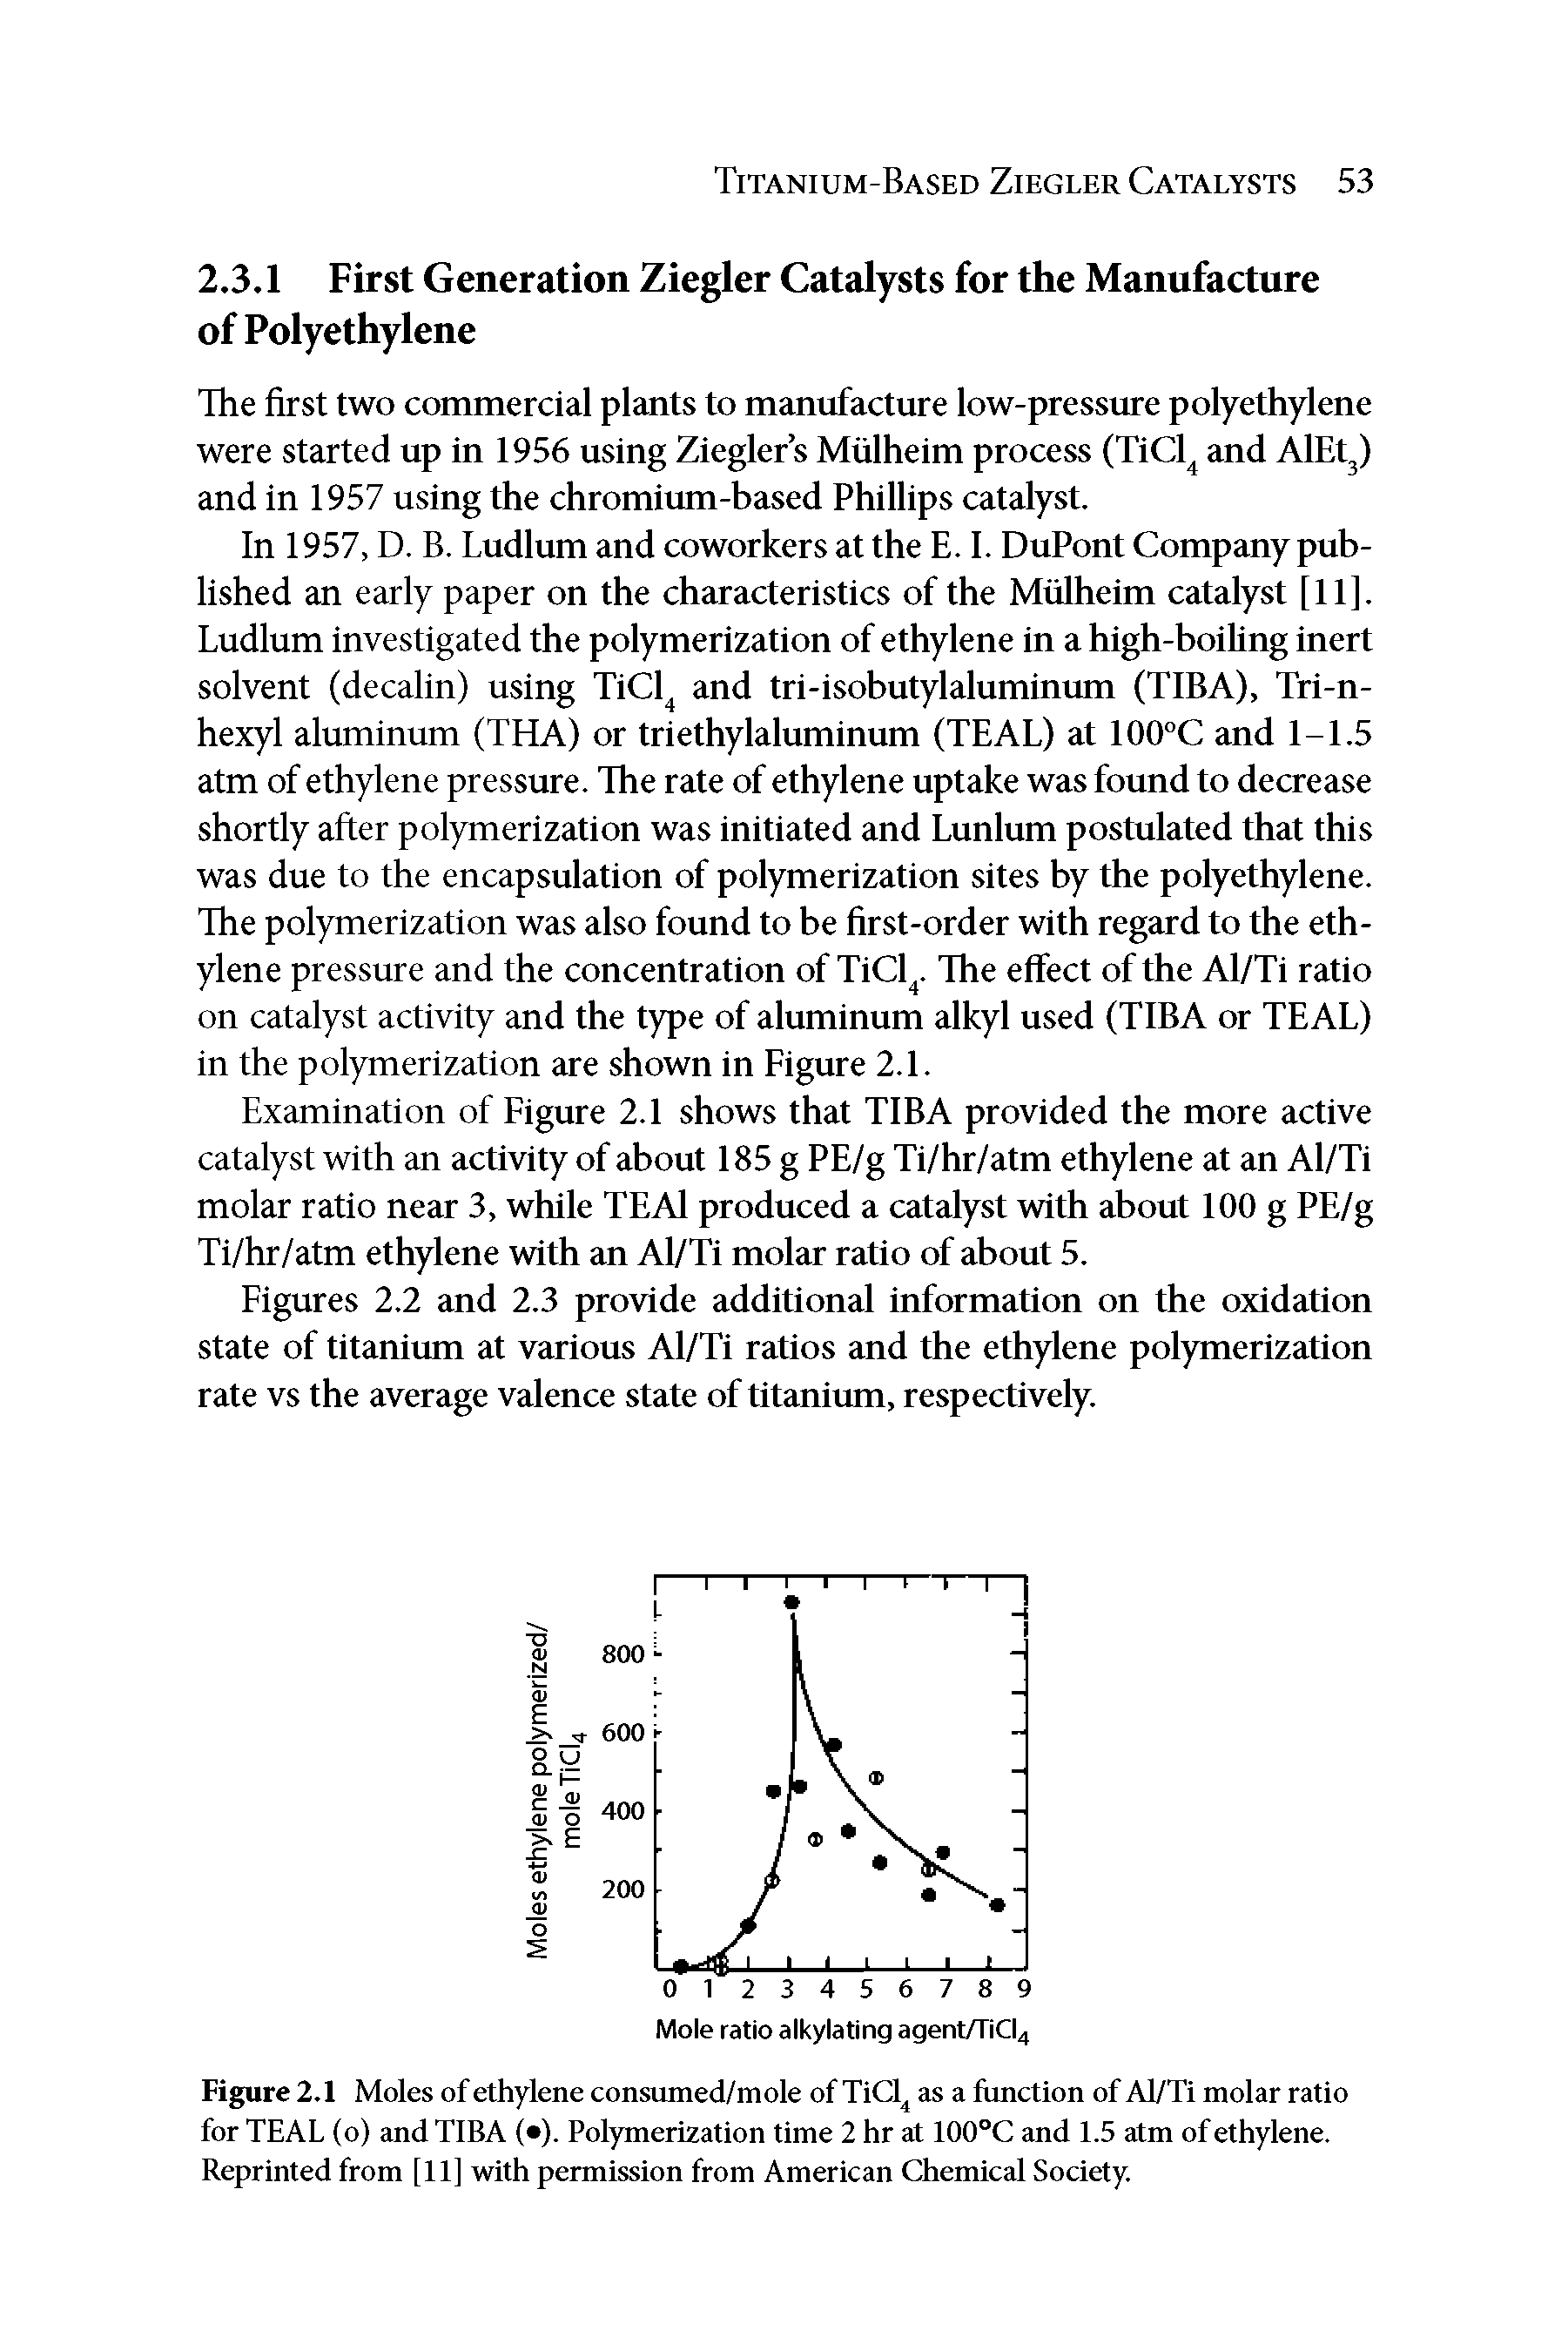 Figures 2.2 and 2.3 provide additional information on the oxidation state of titanium at various Al/Ti ratios and the ethylene polymerization rate vs the average valence state of titanium, respectively.